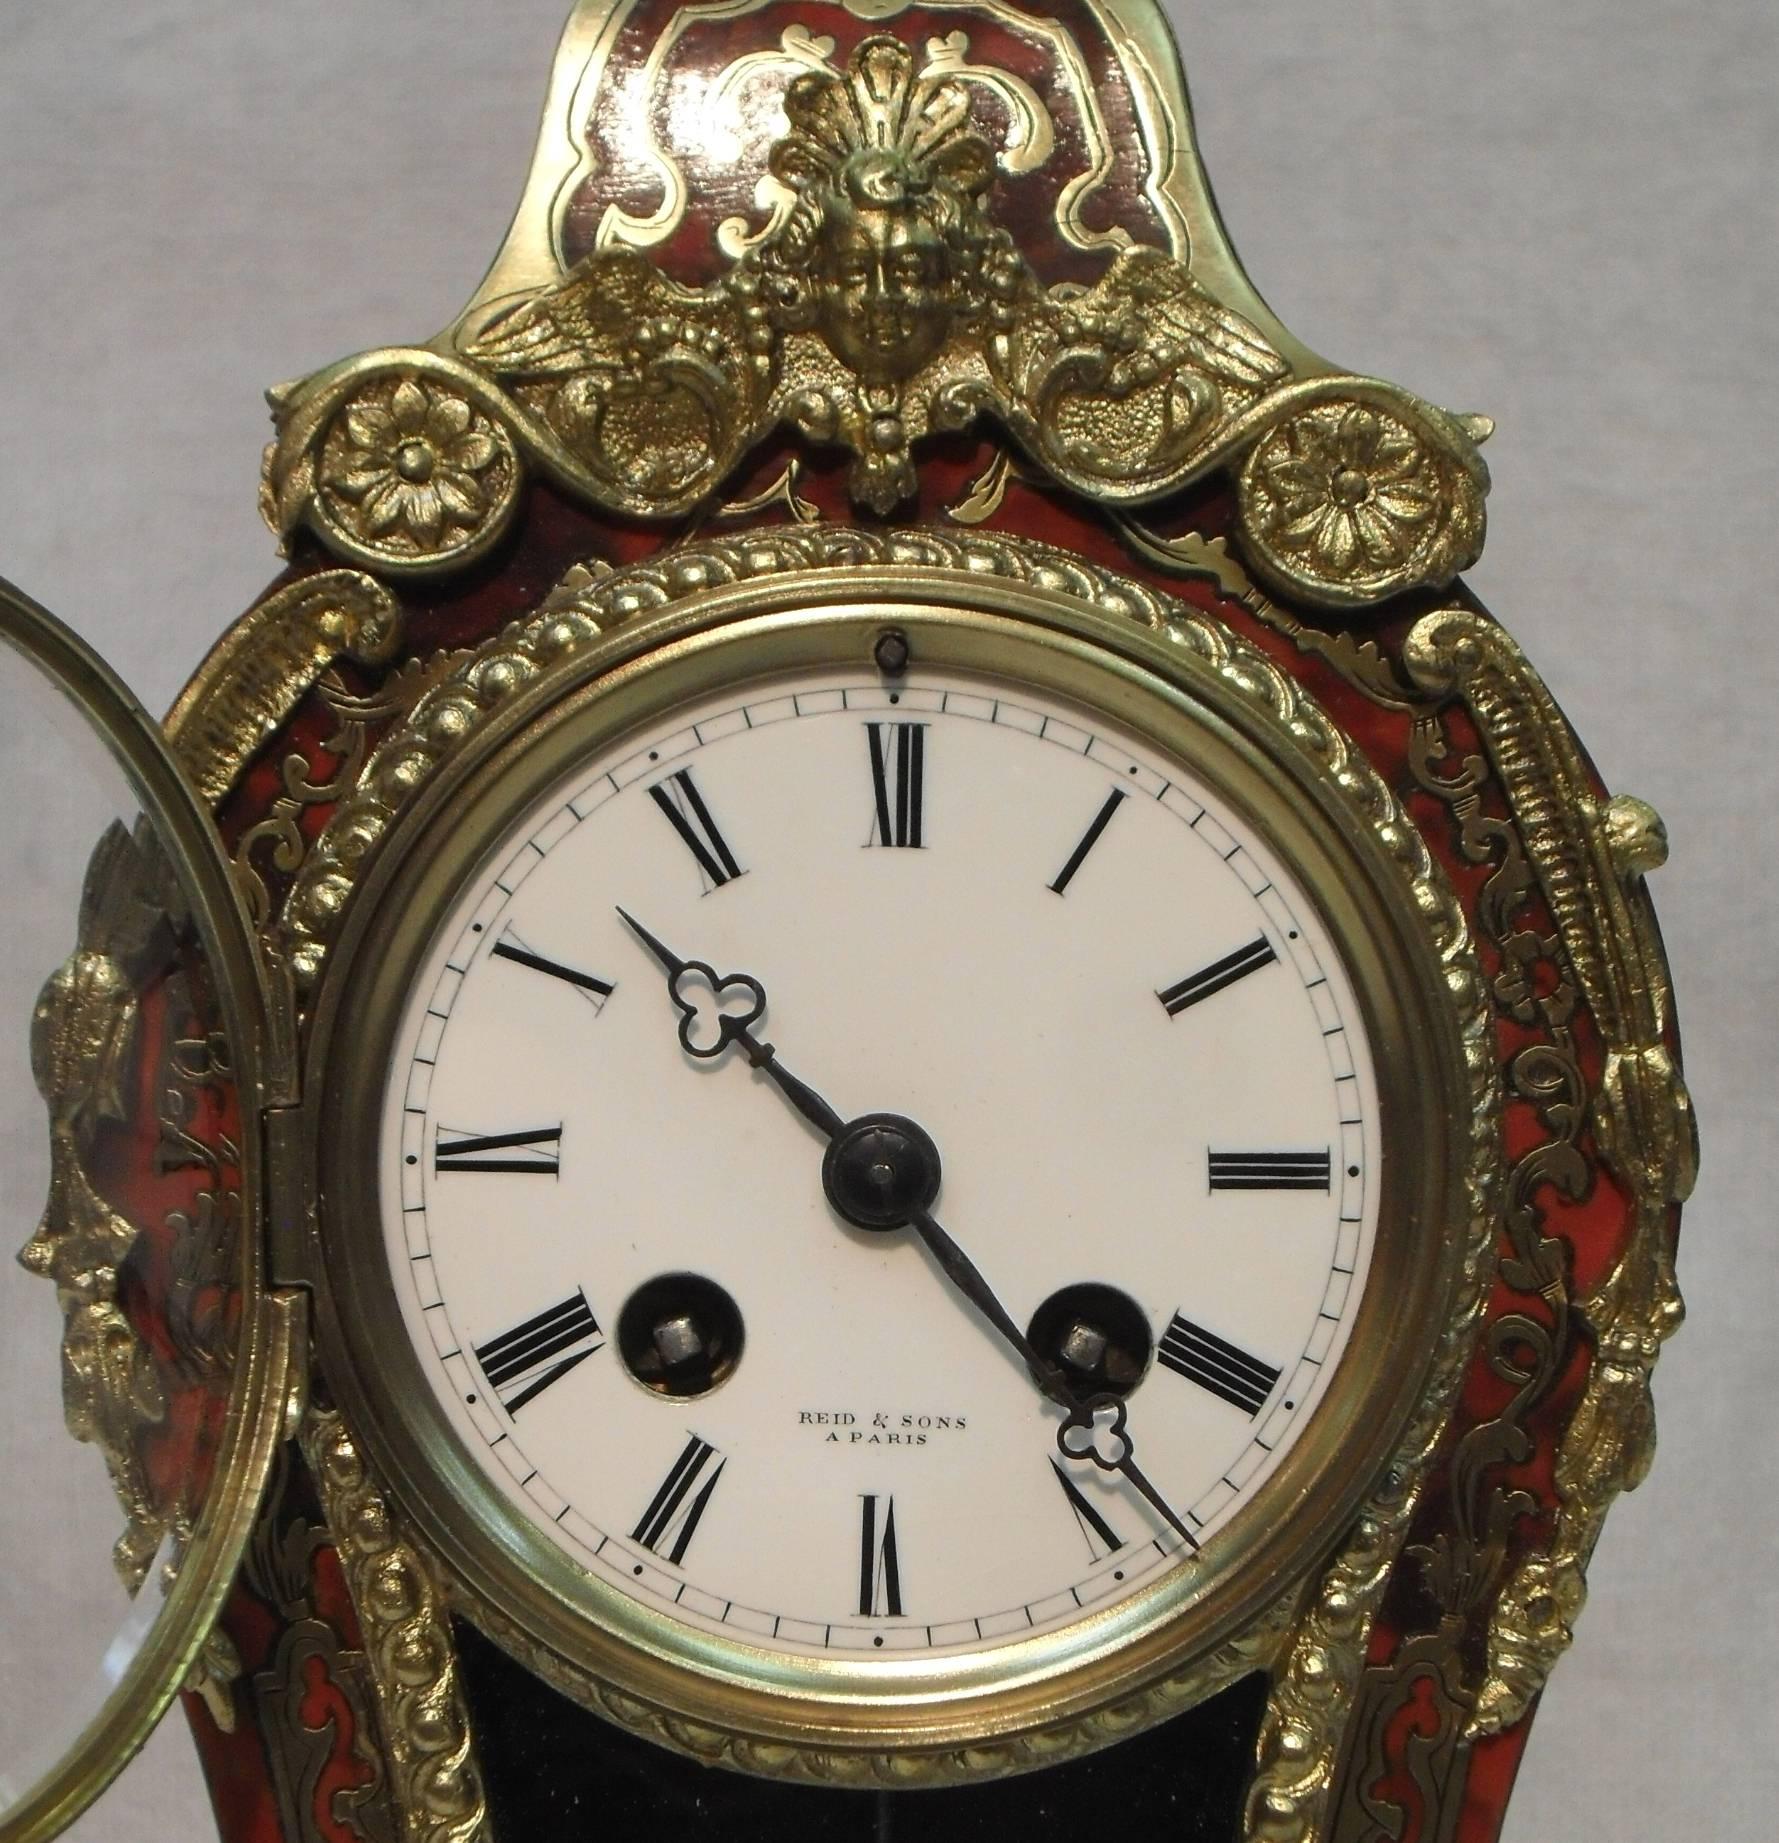 A good quality French Boulle red tortoise shell and engraved brass inlaid mantel clock in the Louis XV style with ormolu mounts and pendulum viewing window. The clock has a white enamel dial with French eight day movement with outside count wheel